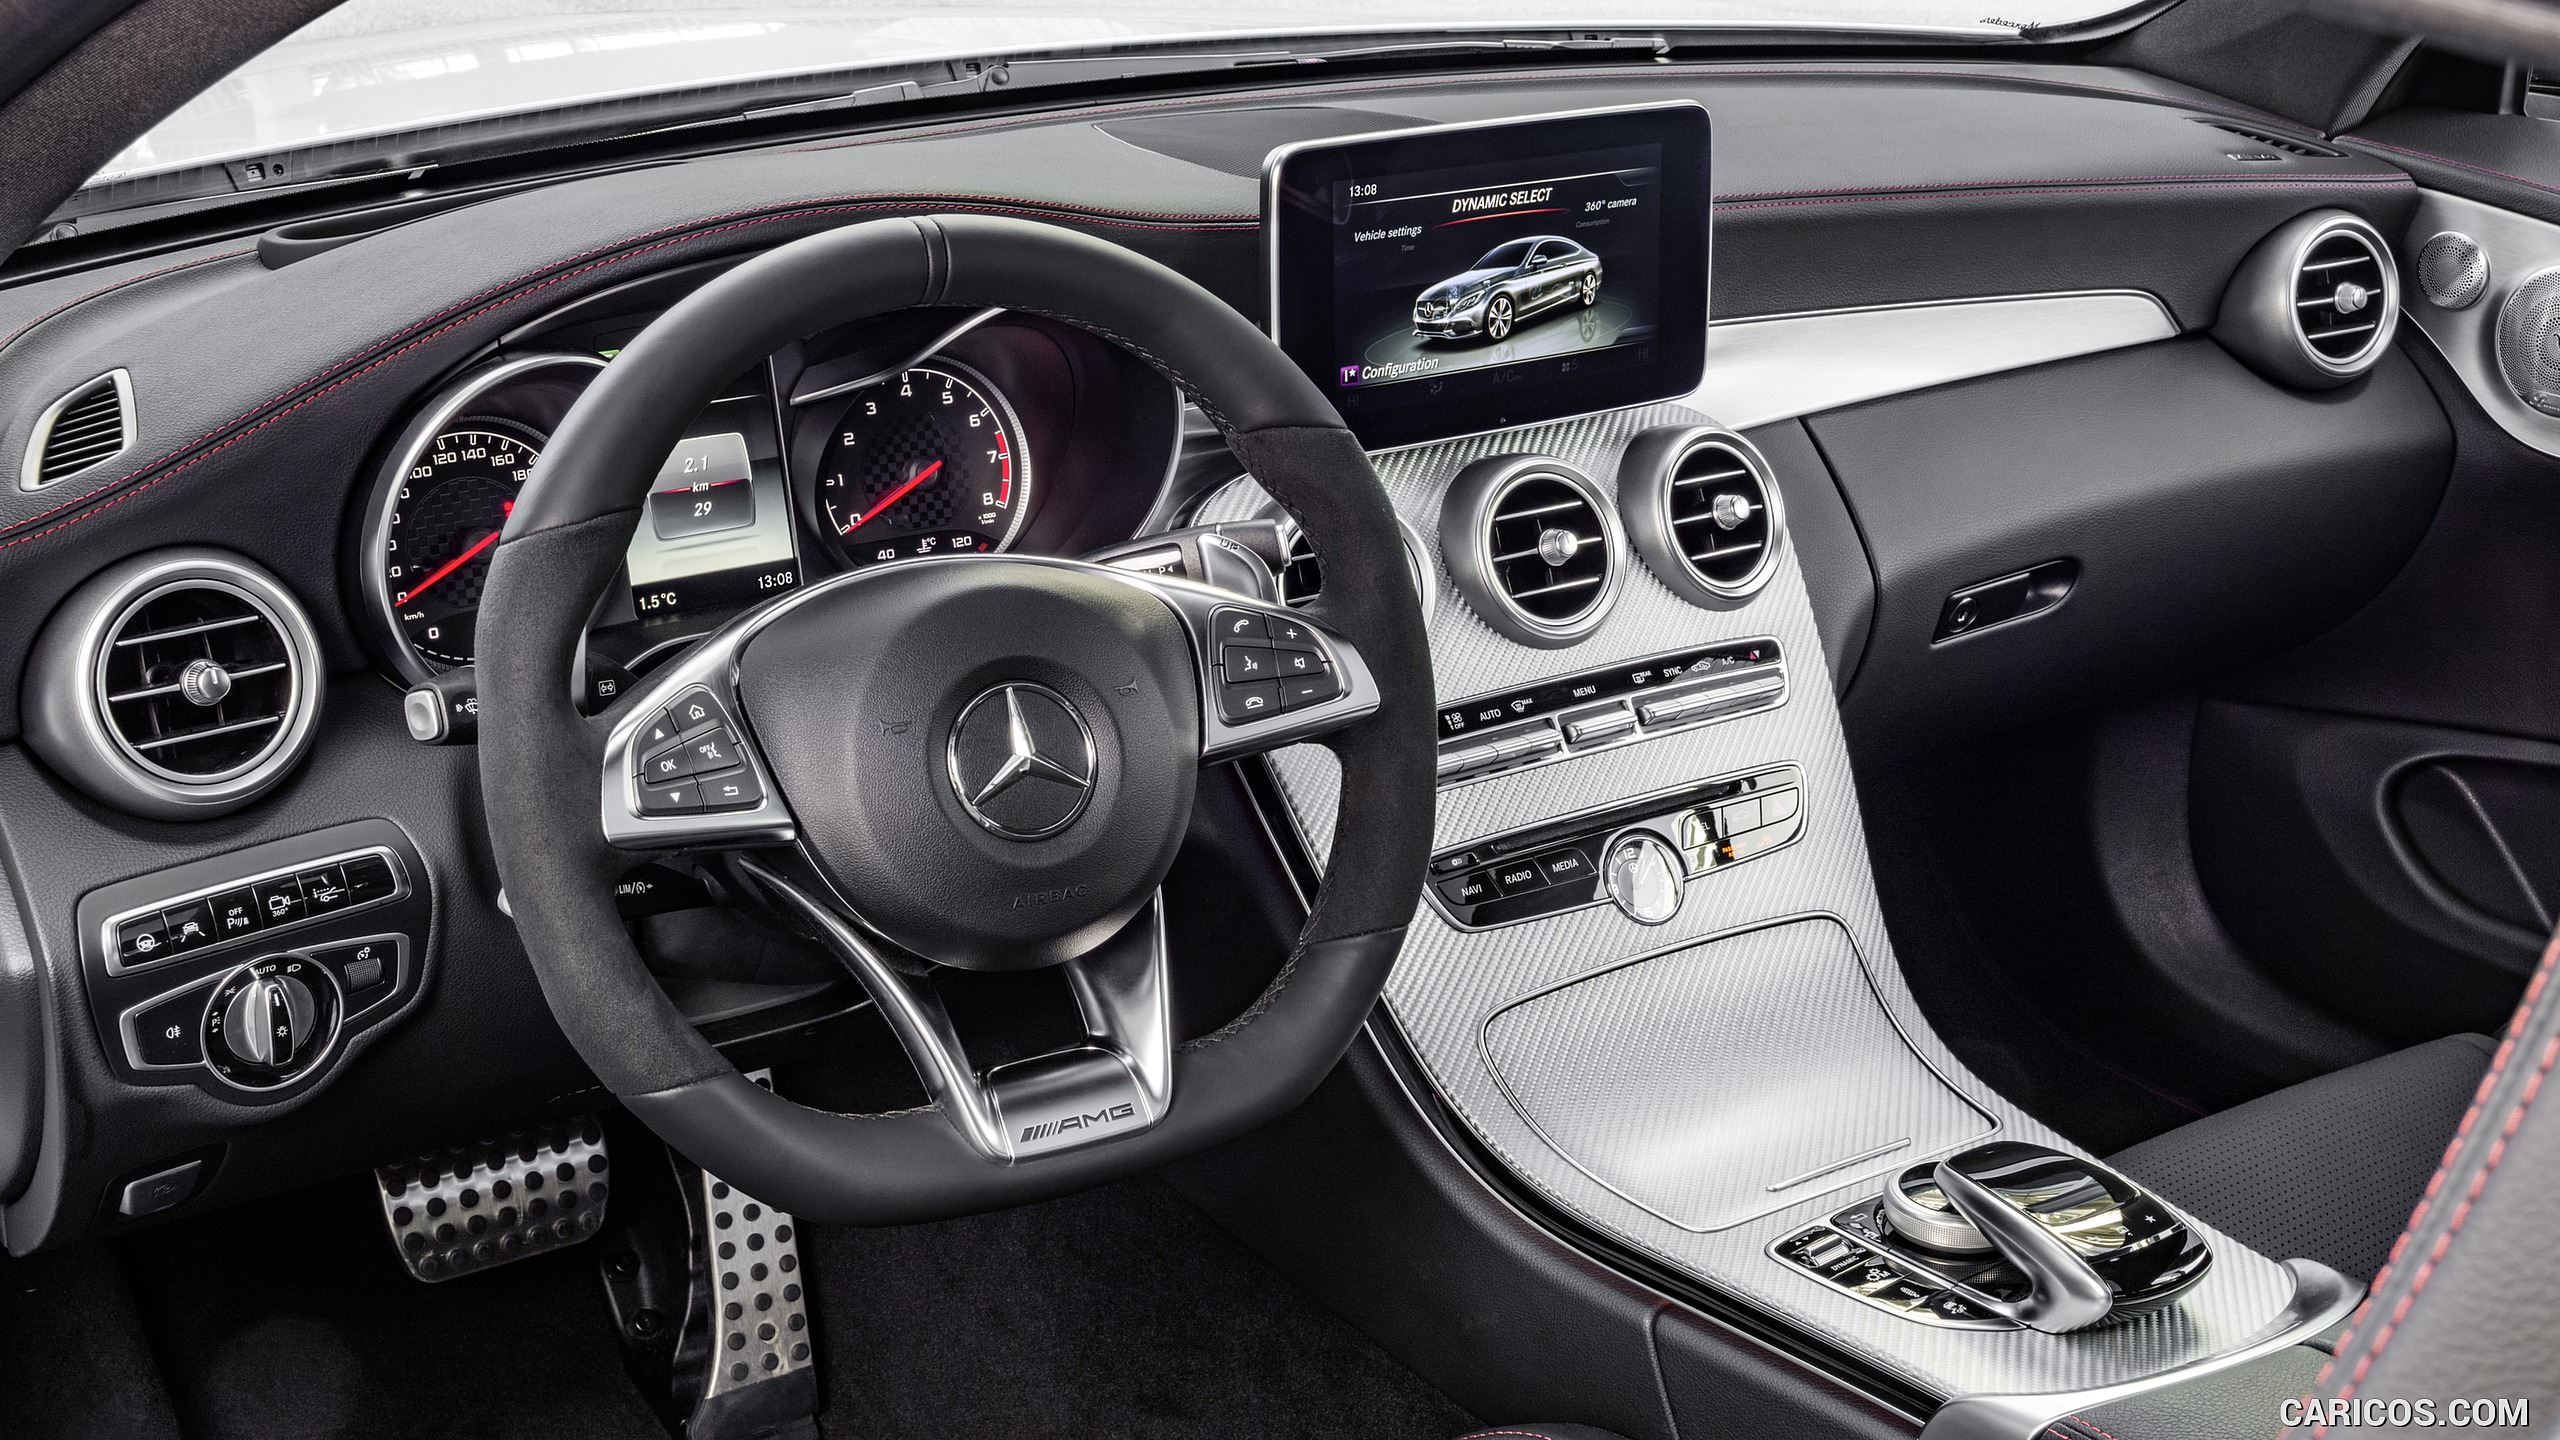 2017 Mercedes-AMG C43 4MATIC Coupé - Leather Black Interior, #10 of 30